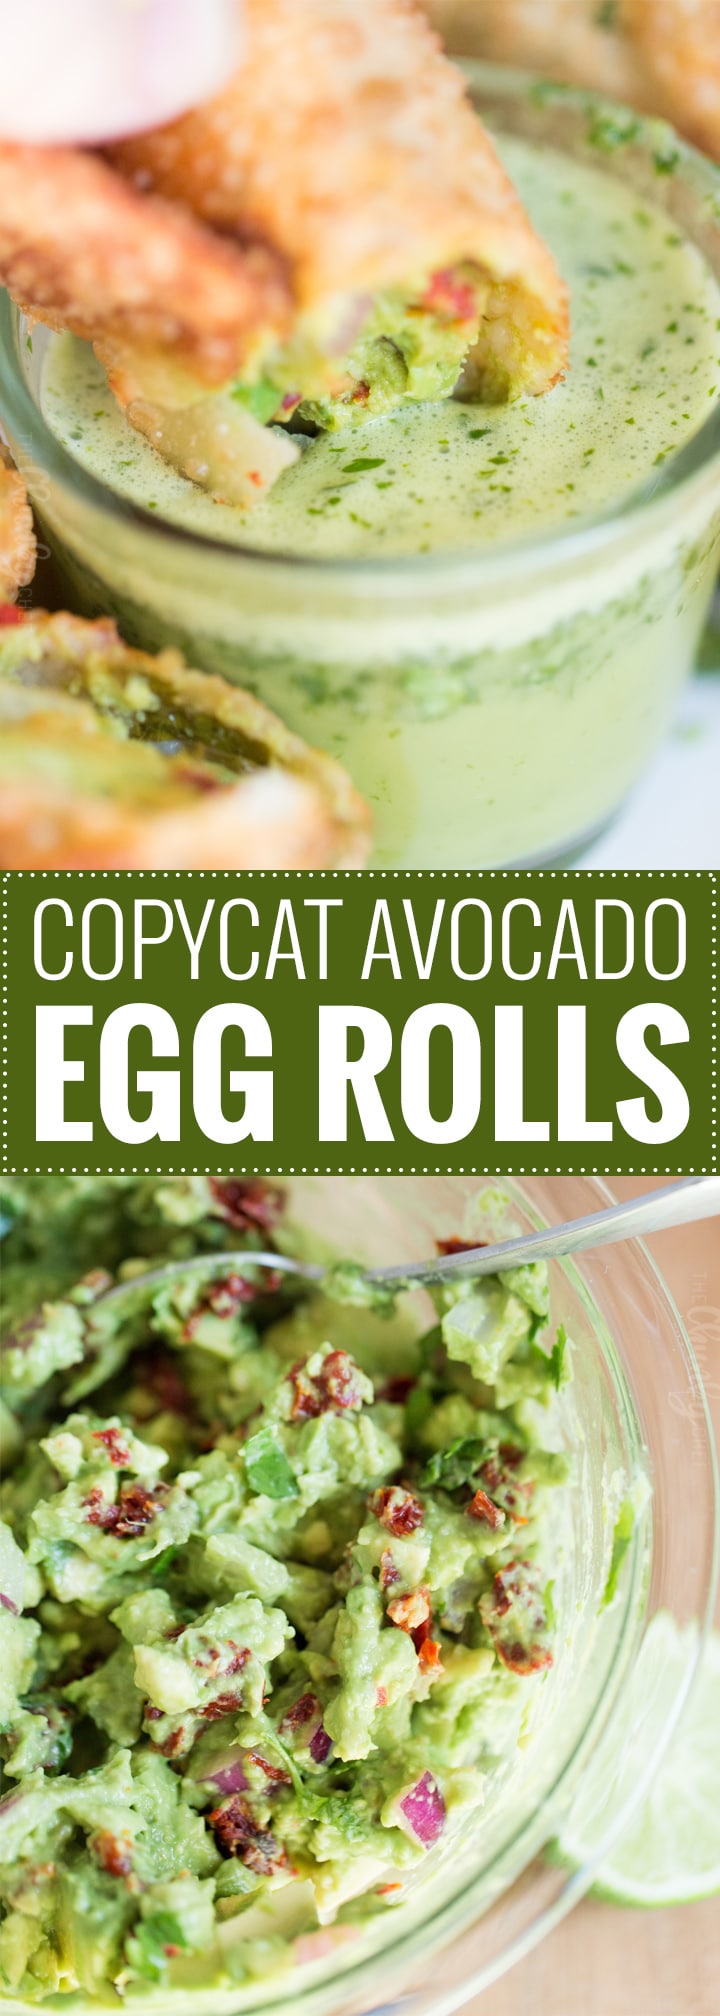 Copycat Avocado Egg Rolls | A copycat of The Cheesecake Factory's avocado egg rolls, this recipe is loaded with amazing flavors and served with the most delicious honey cilantro dipping sauce!  Not a spot on copycat, but one made with easy to find ingredients! | https://www.thechunkychef.com | #appetizer #copycat #eggroll #avocado #party